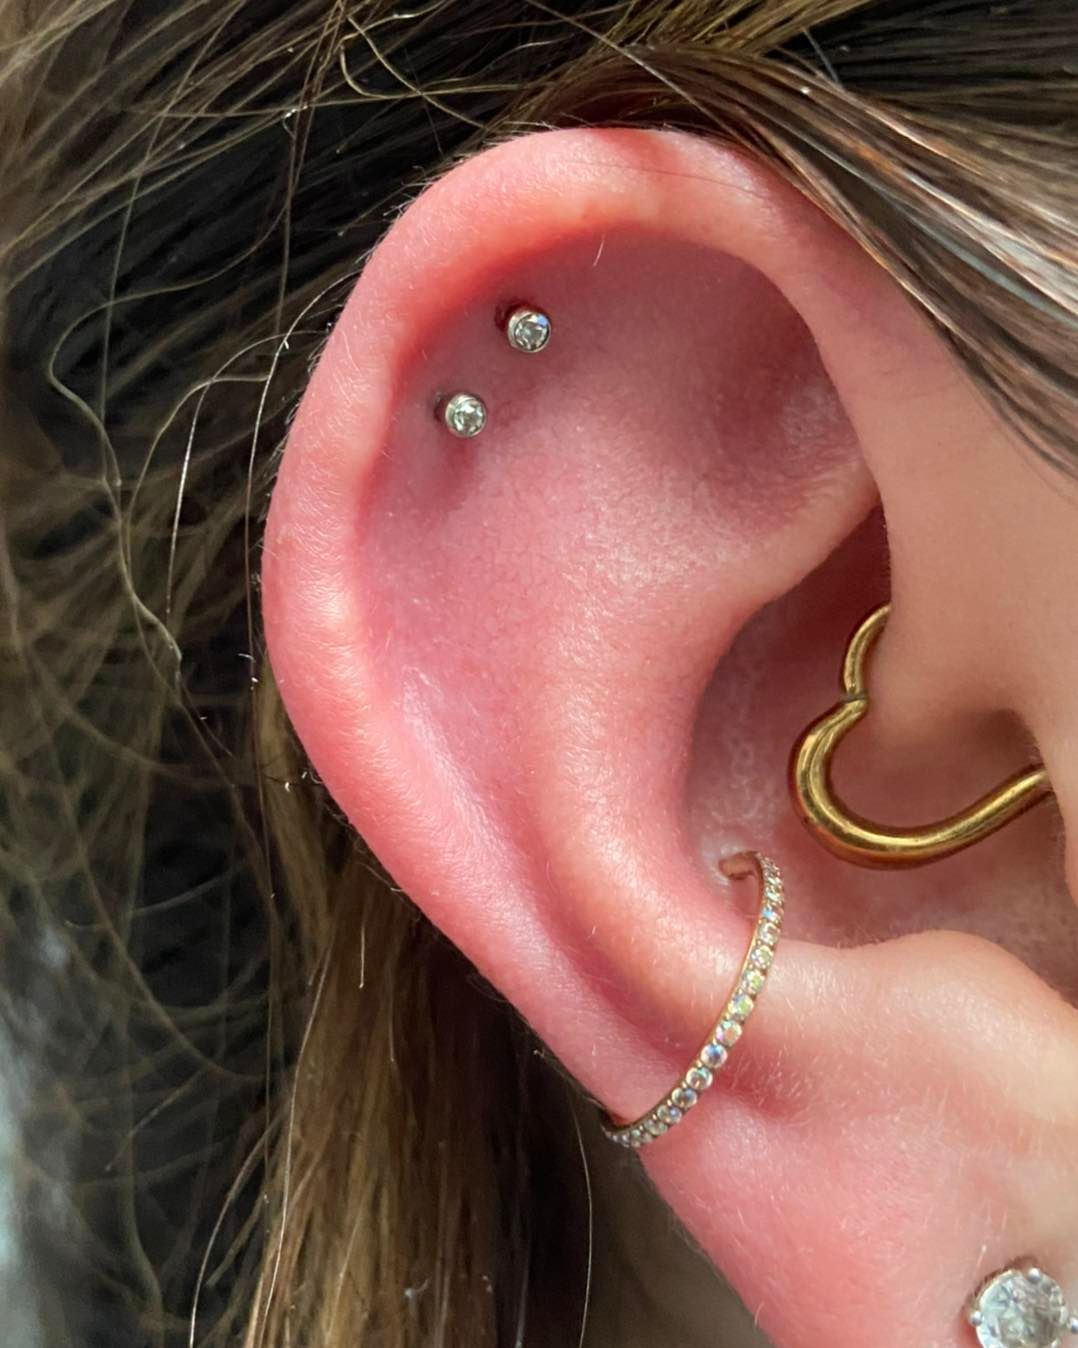 a close up of a woman 's ear with a heart shaped piercing